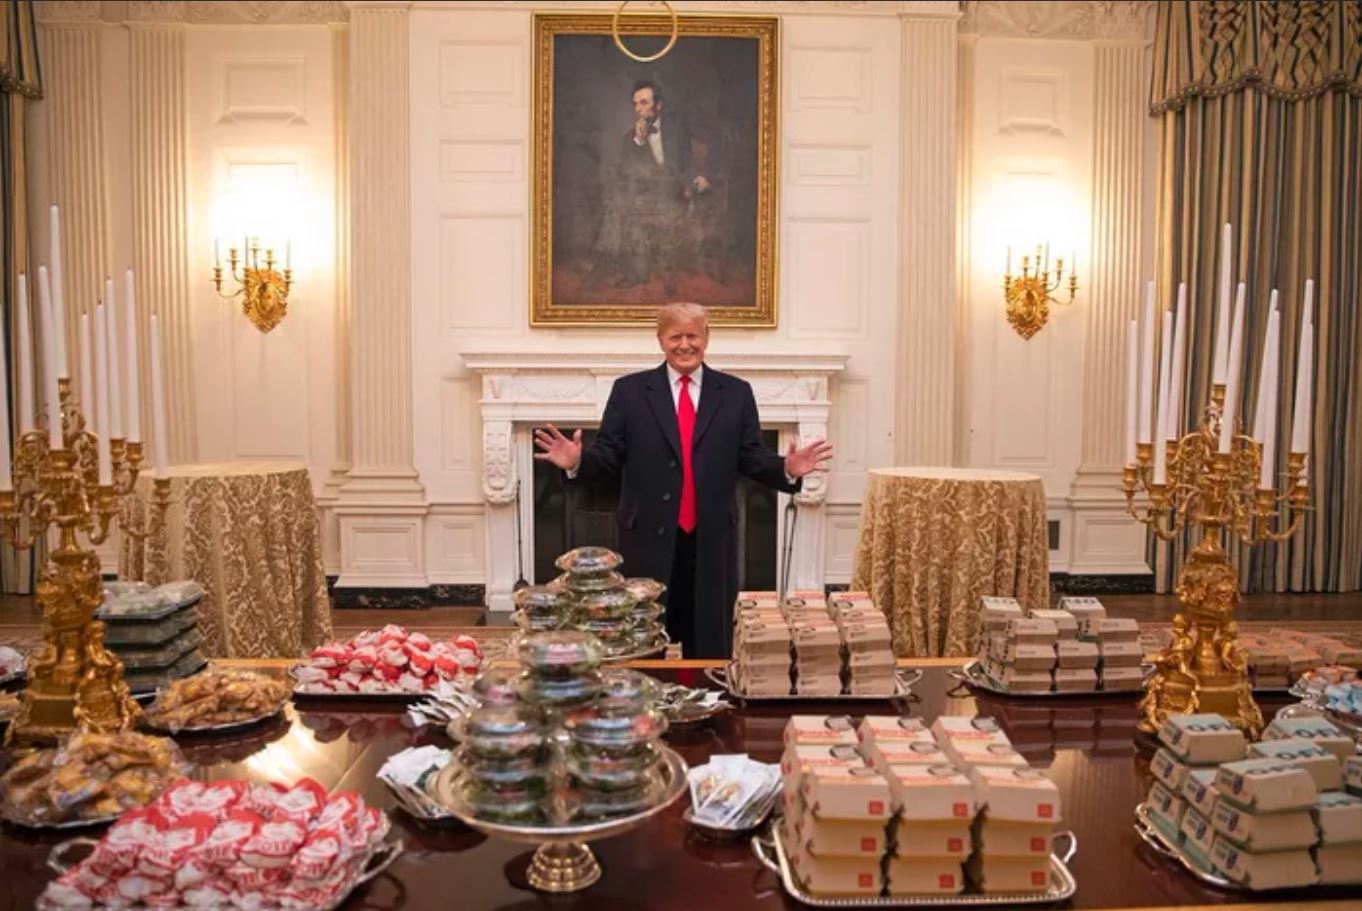 Trump serves McDonald’s on silver platters at White House lunch for college football champs